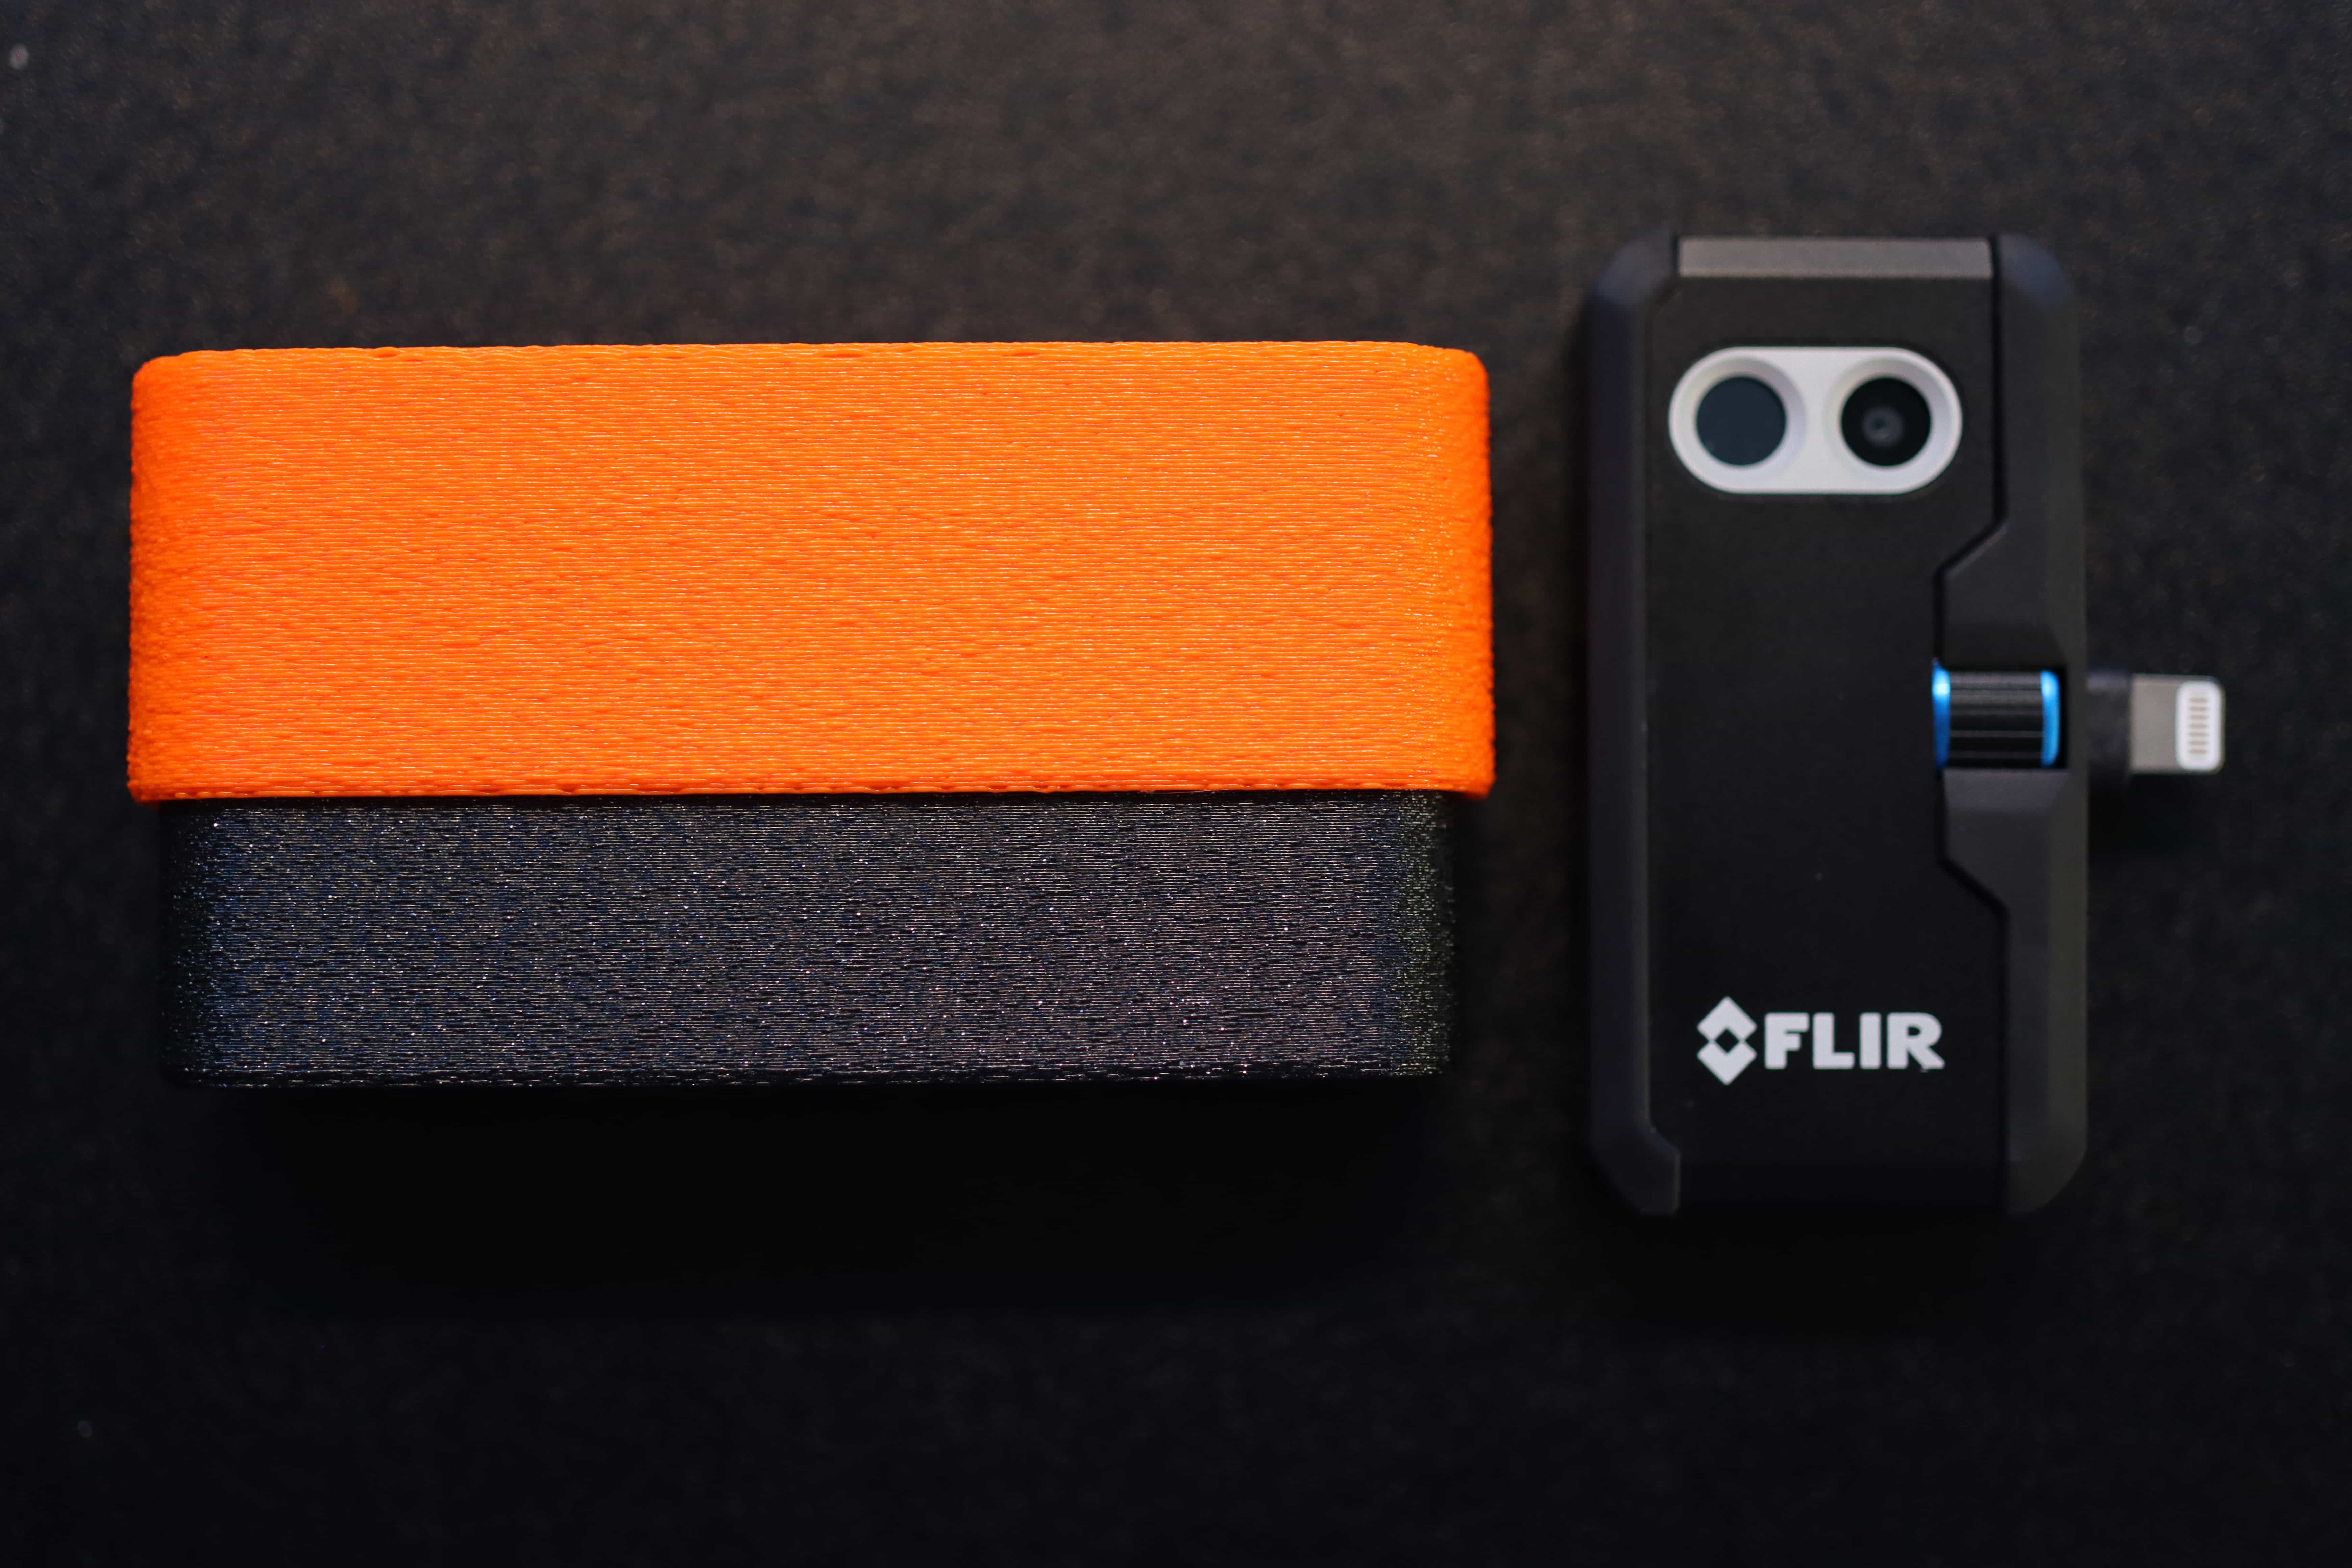 Fuzzy Skin Magnetic Snap Case for FLIR One Pro Thermal Camera